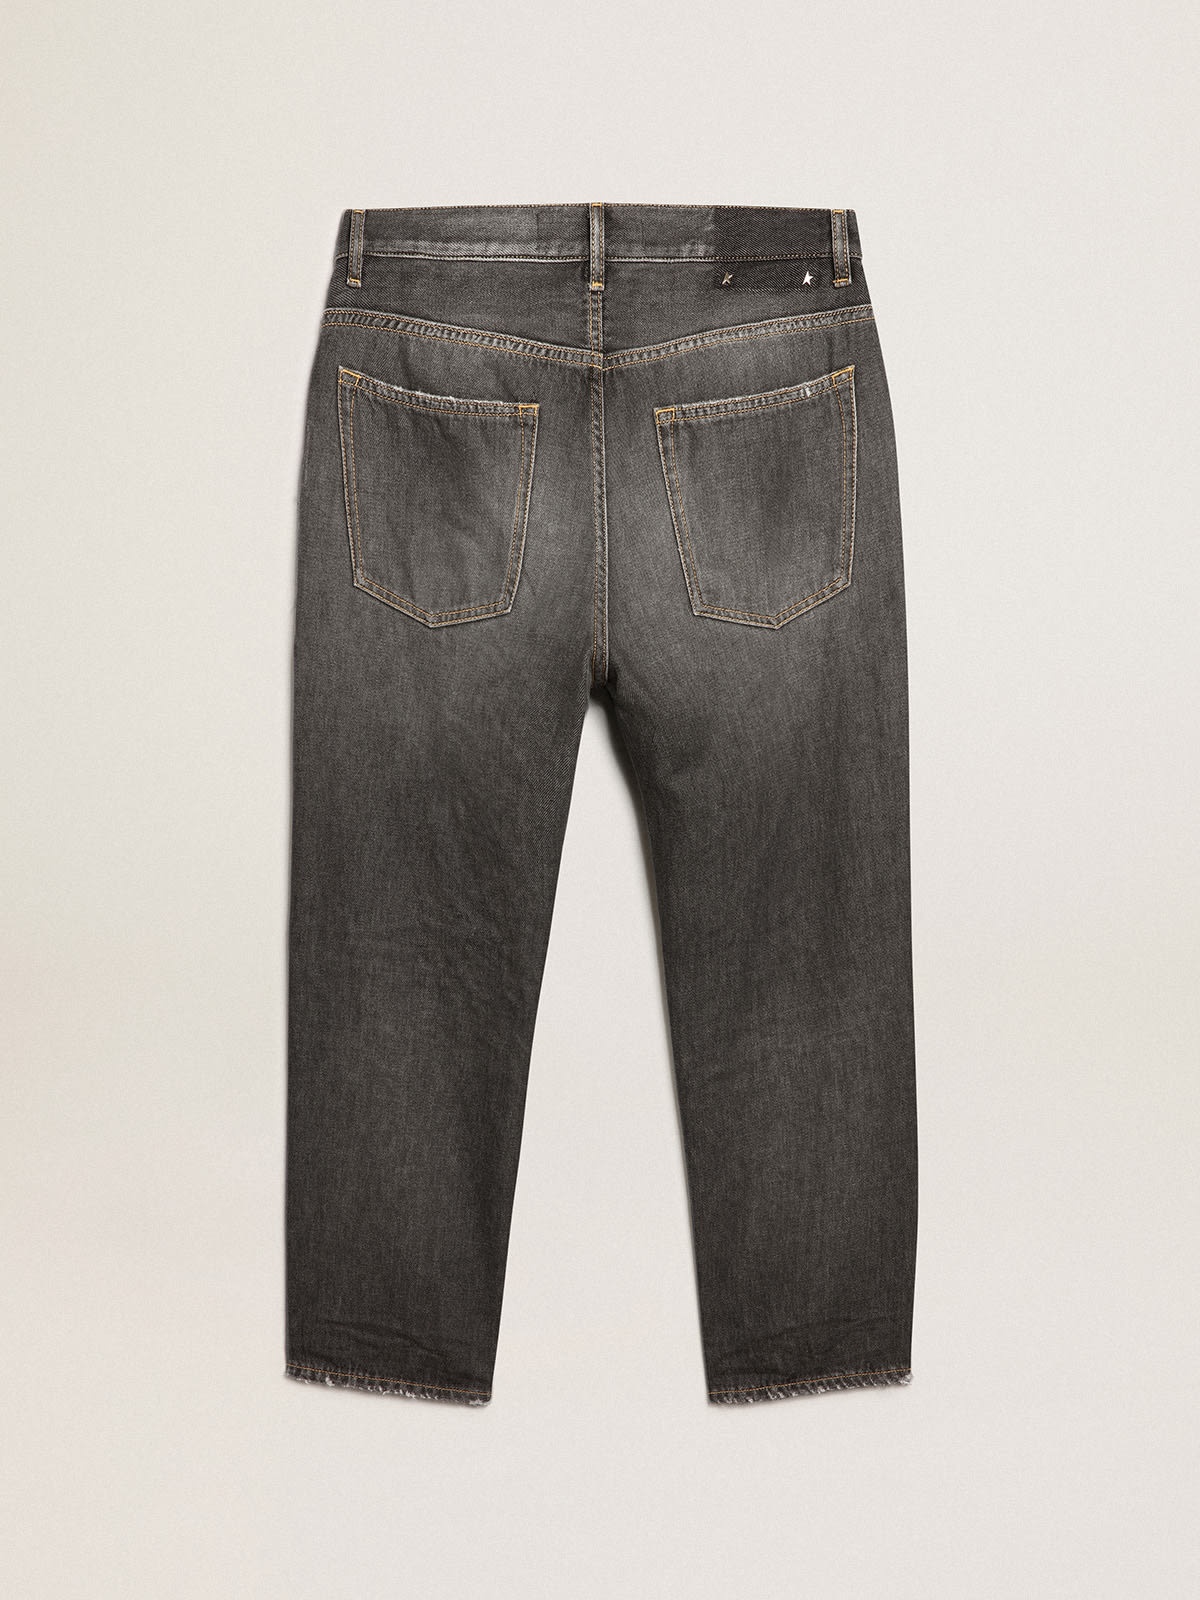 Men's black jeans with stonewashed effect - 6